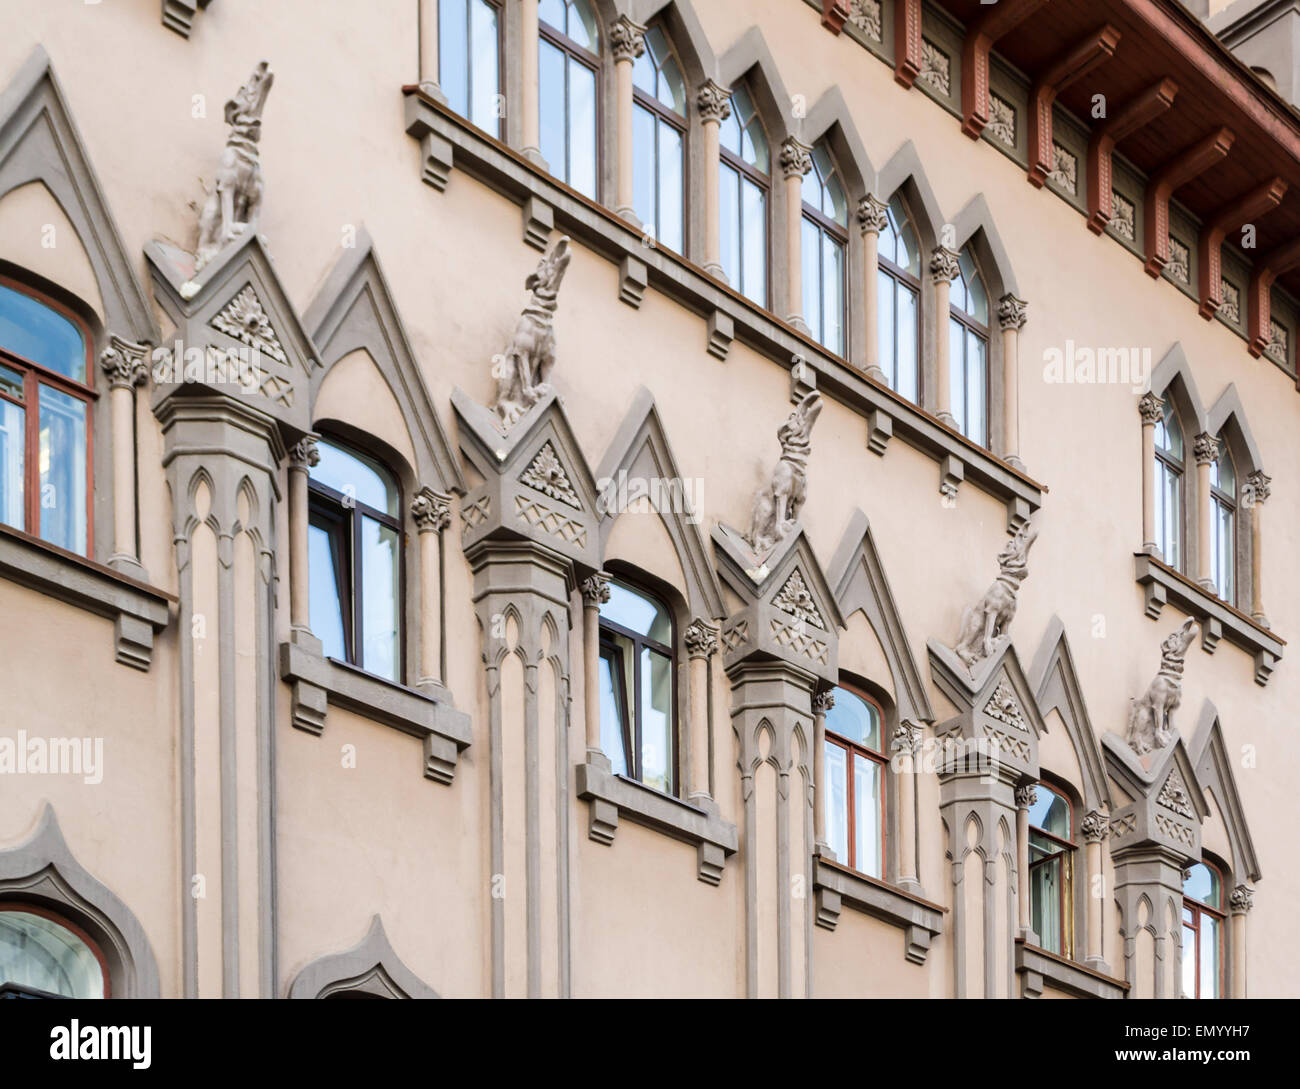 Howling dog gargoyles sit on top of large pillars outside a building facade Stock Photo